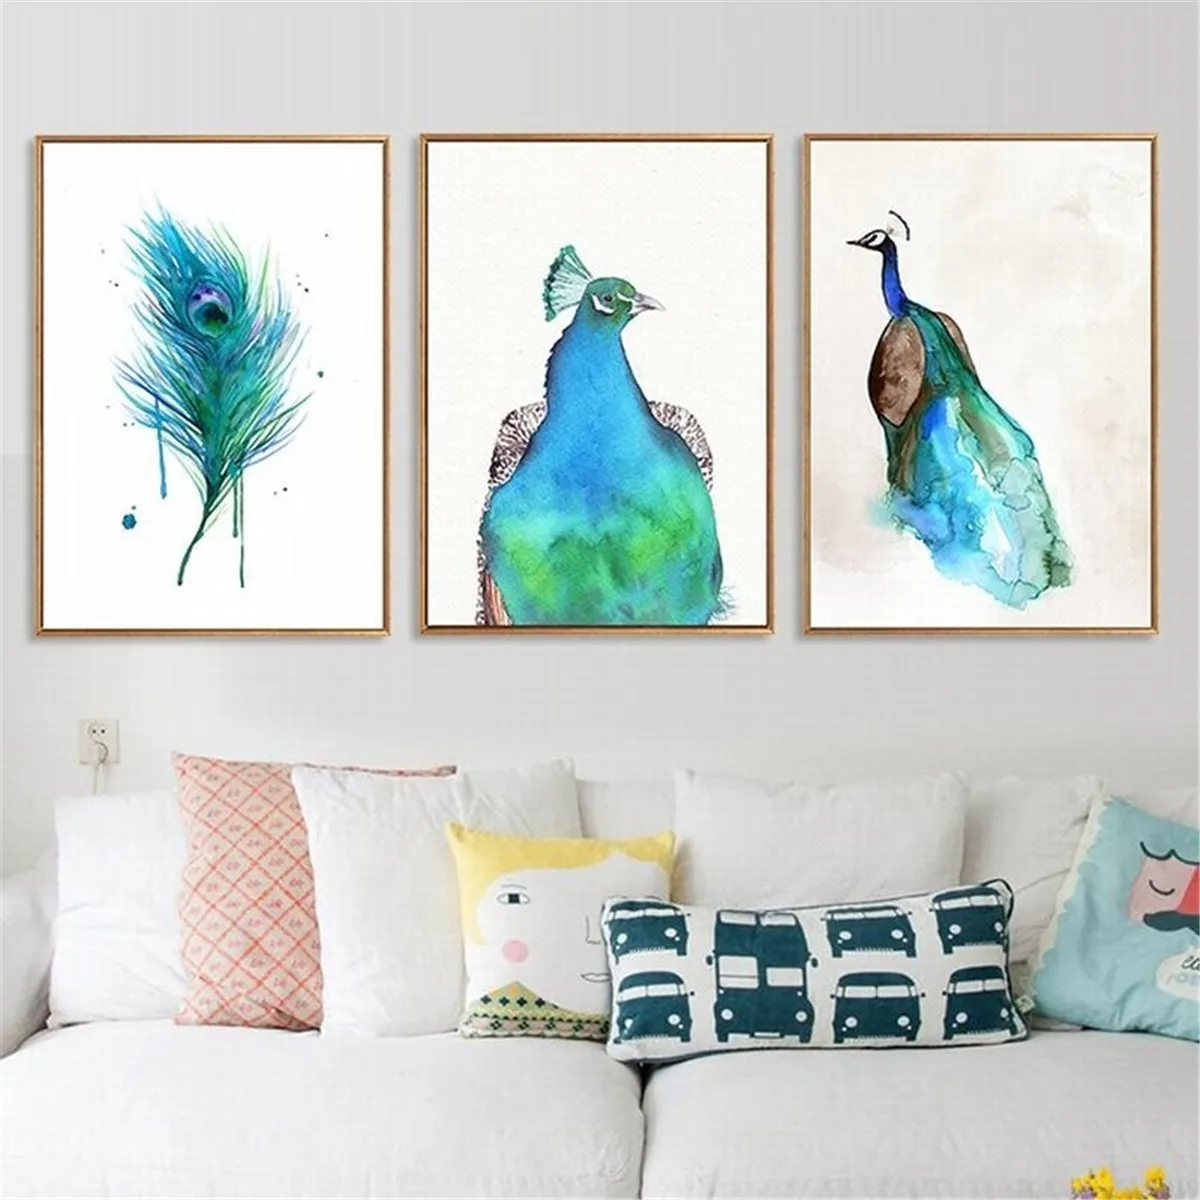 Blue Peacock Feather Modern Wall Art Painting Canvas Prints Poster No Frame 3pcs 